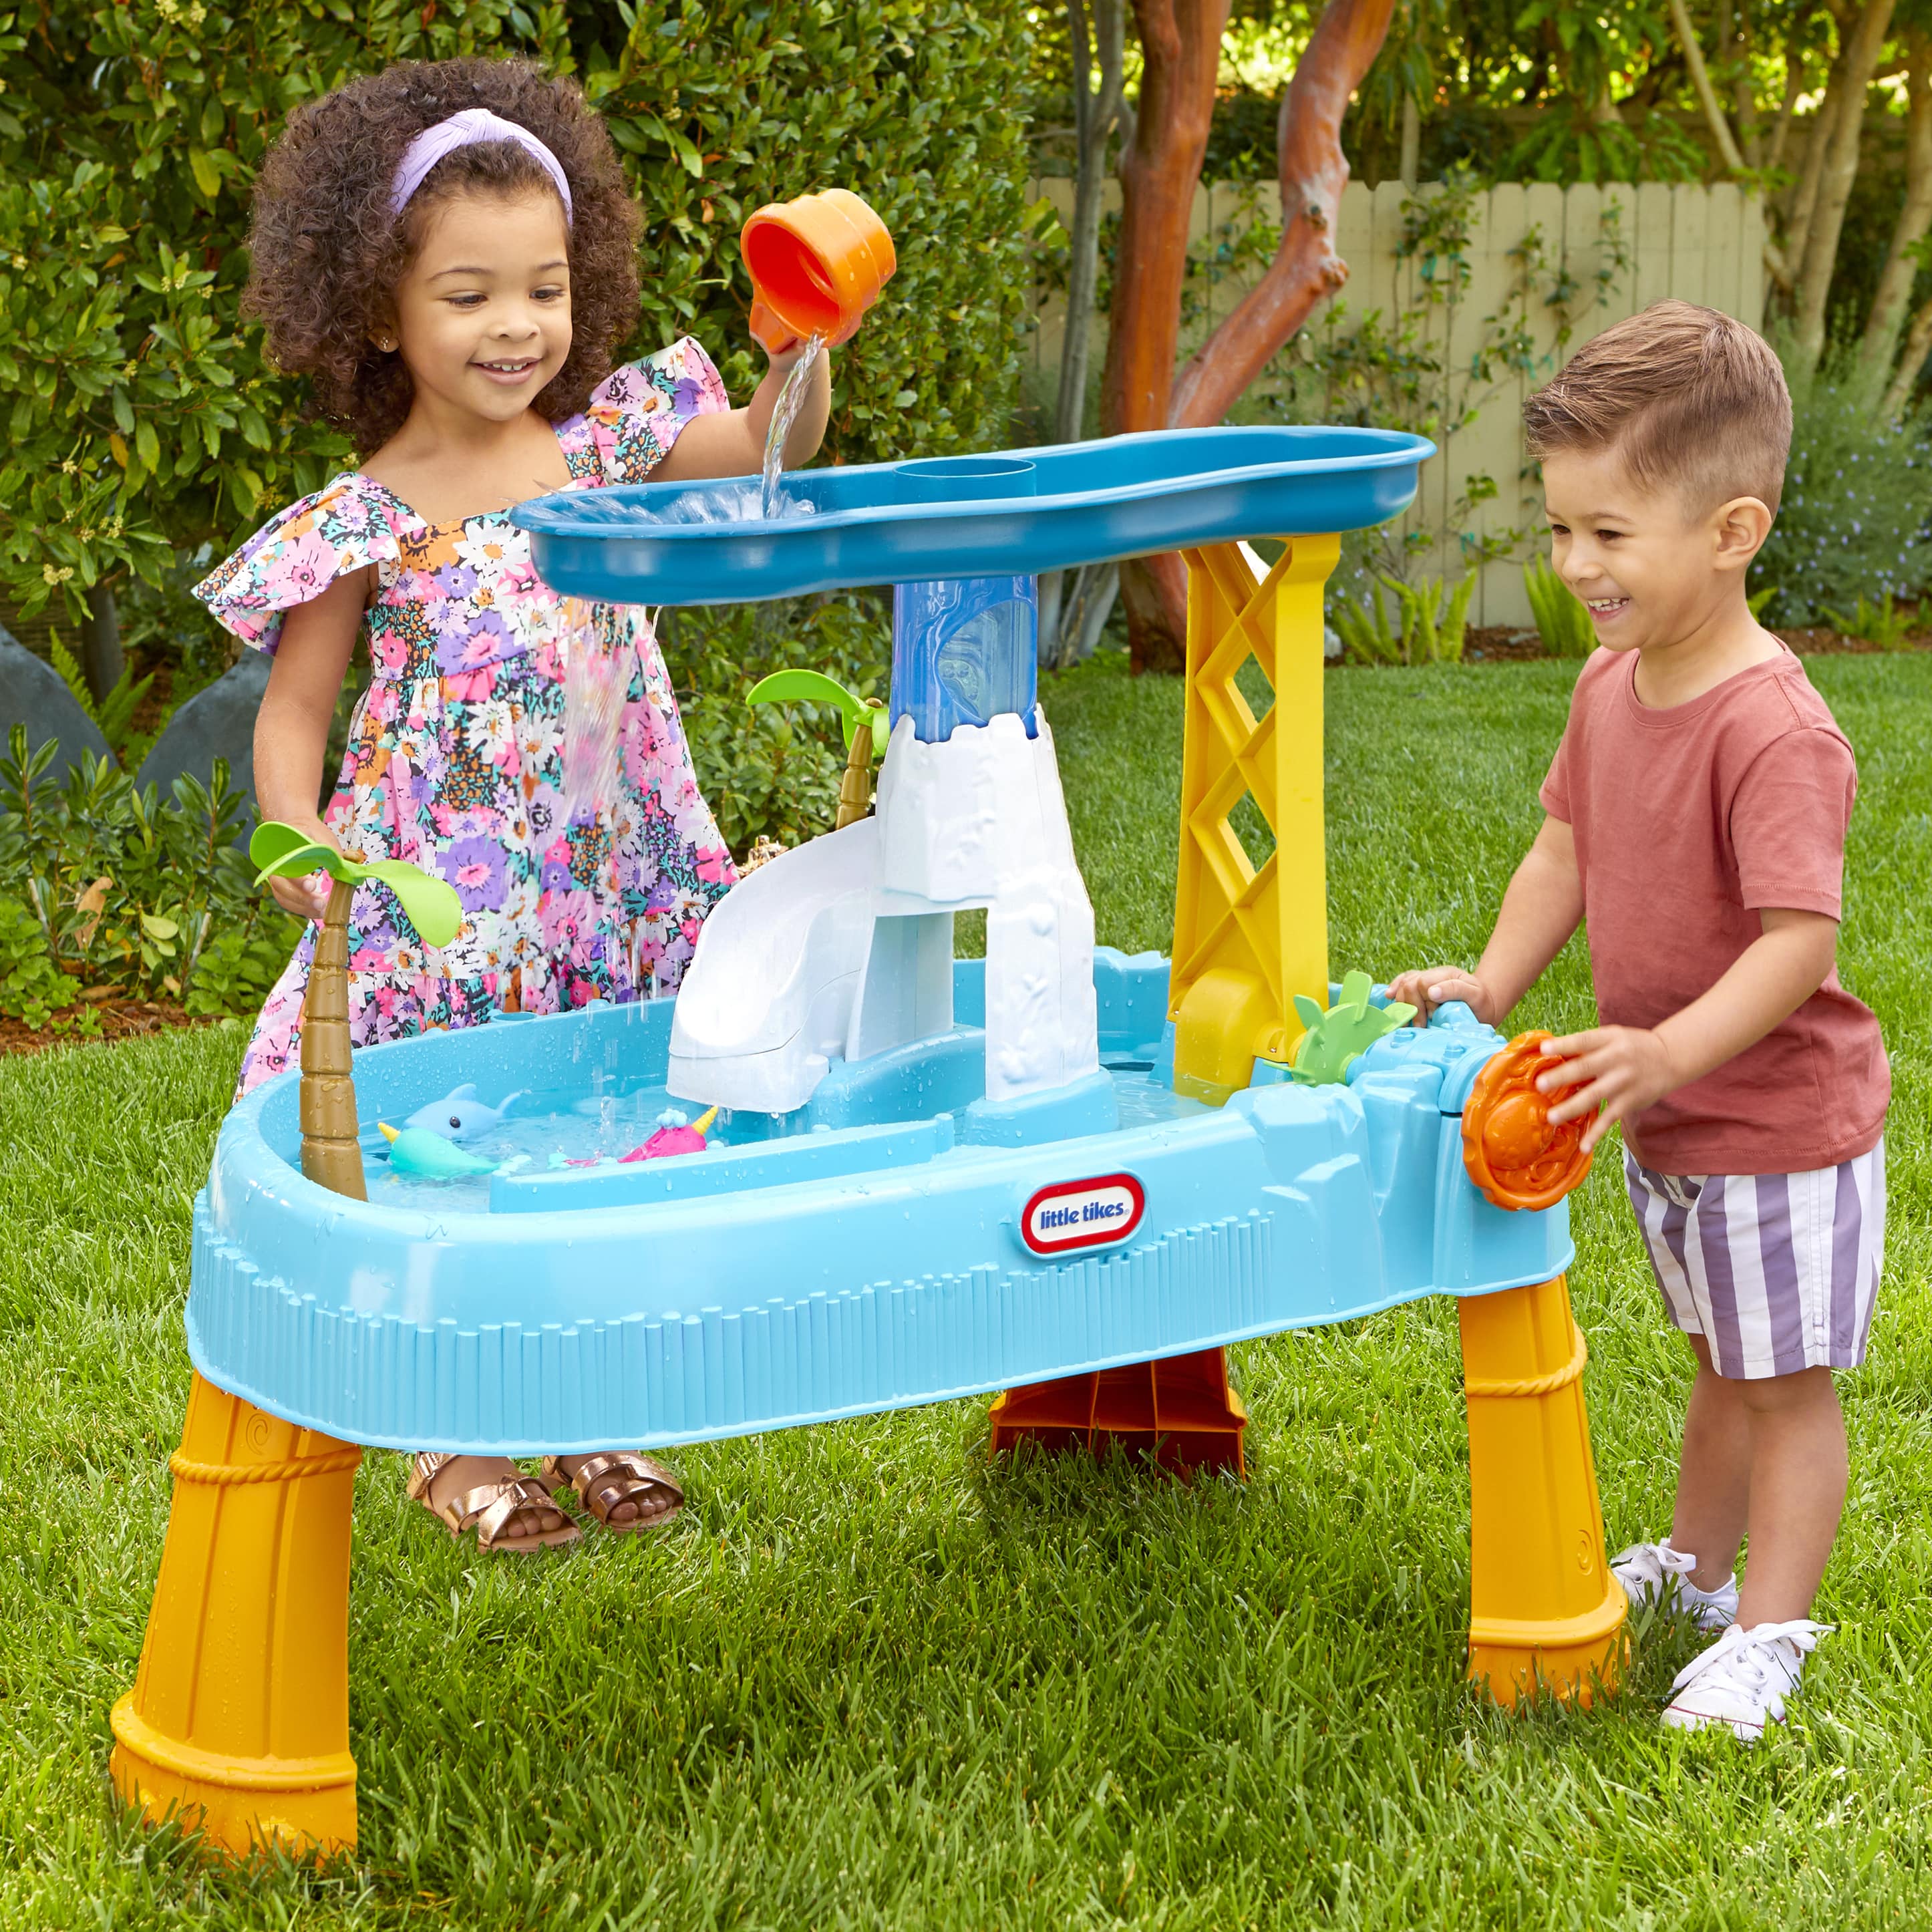 Little Tikes® Waterfall Island™ Water Activity Table with Accessories, for Kids ages 2-5 years - image 4 of 8